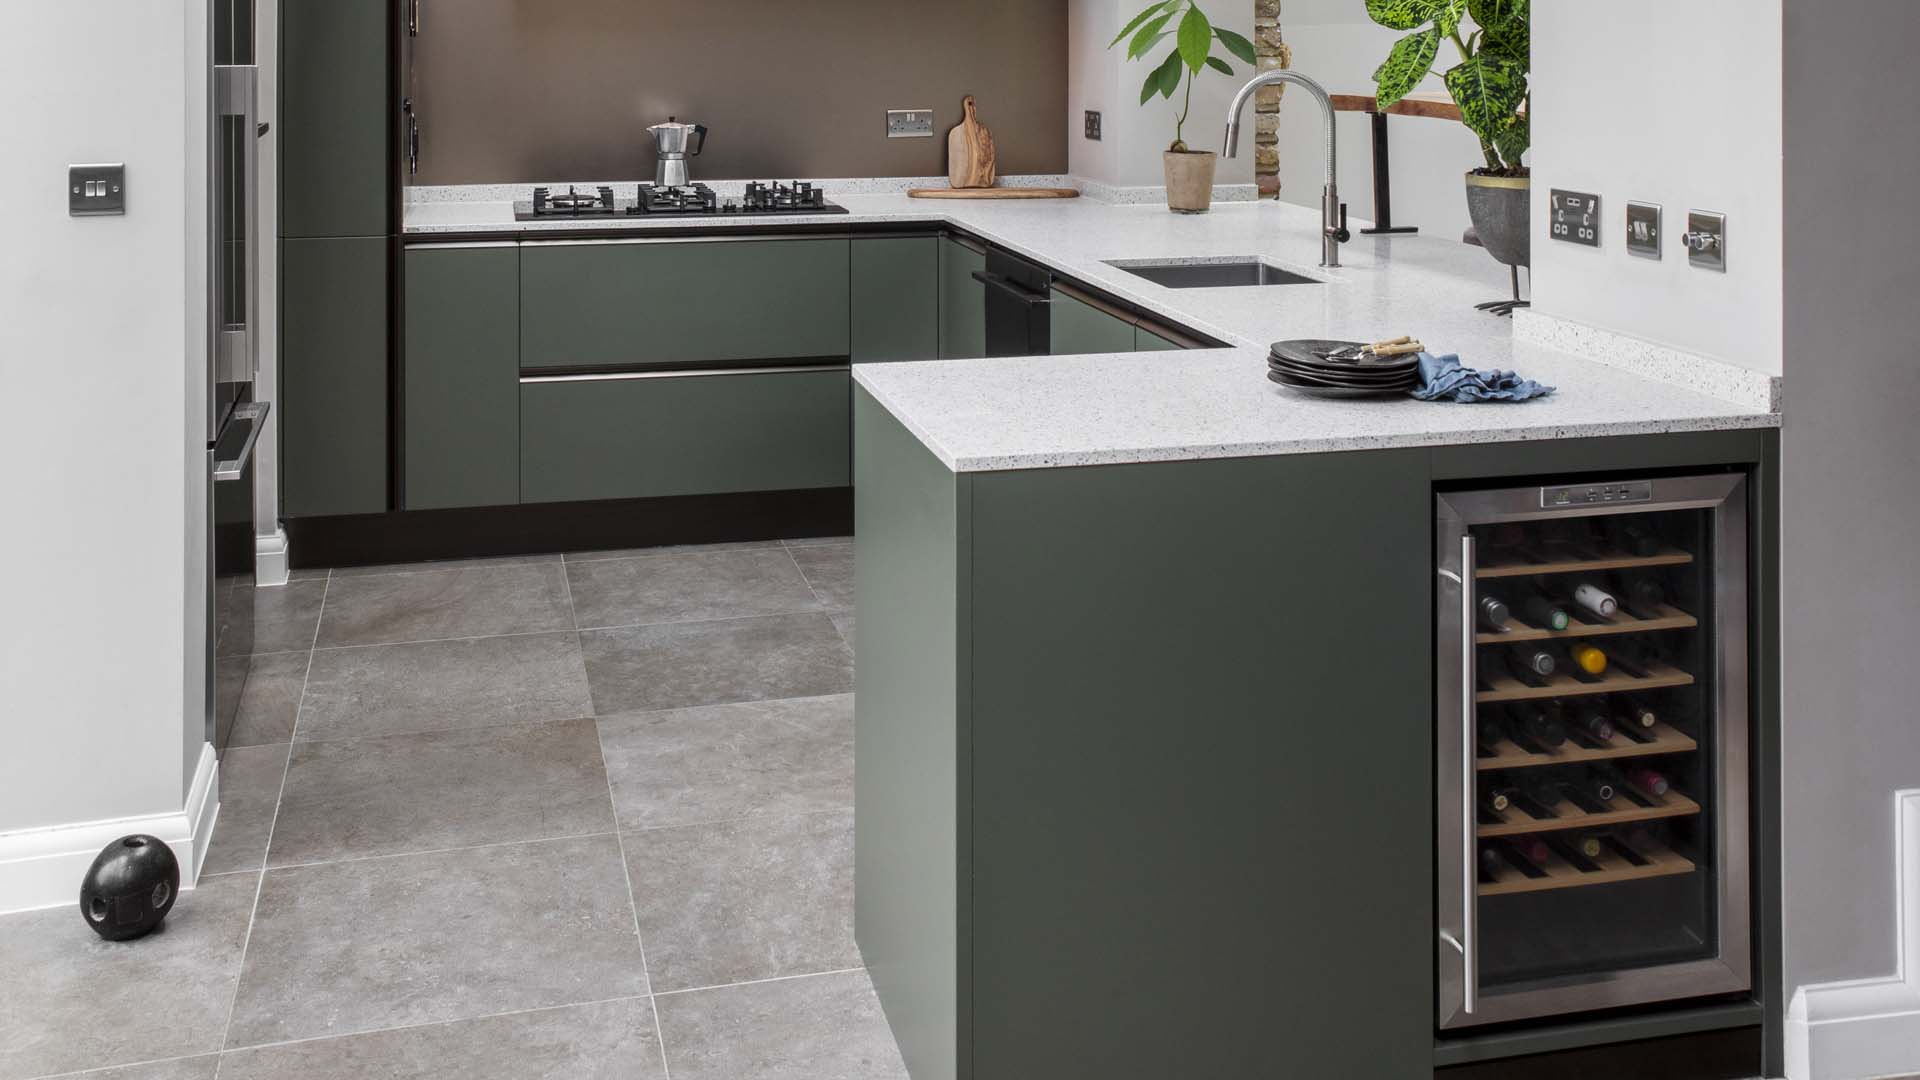 A sage green kitchen with white counters and large grey floor tiles